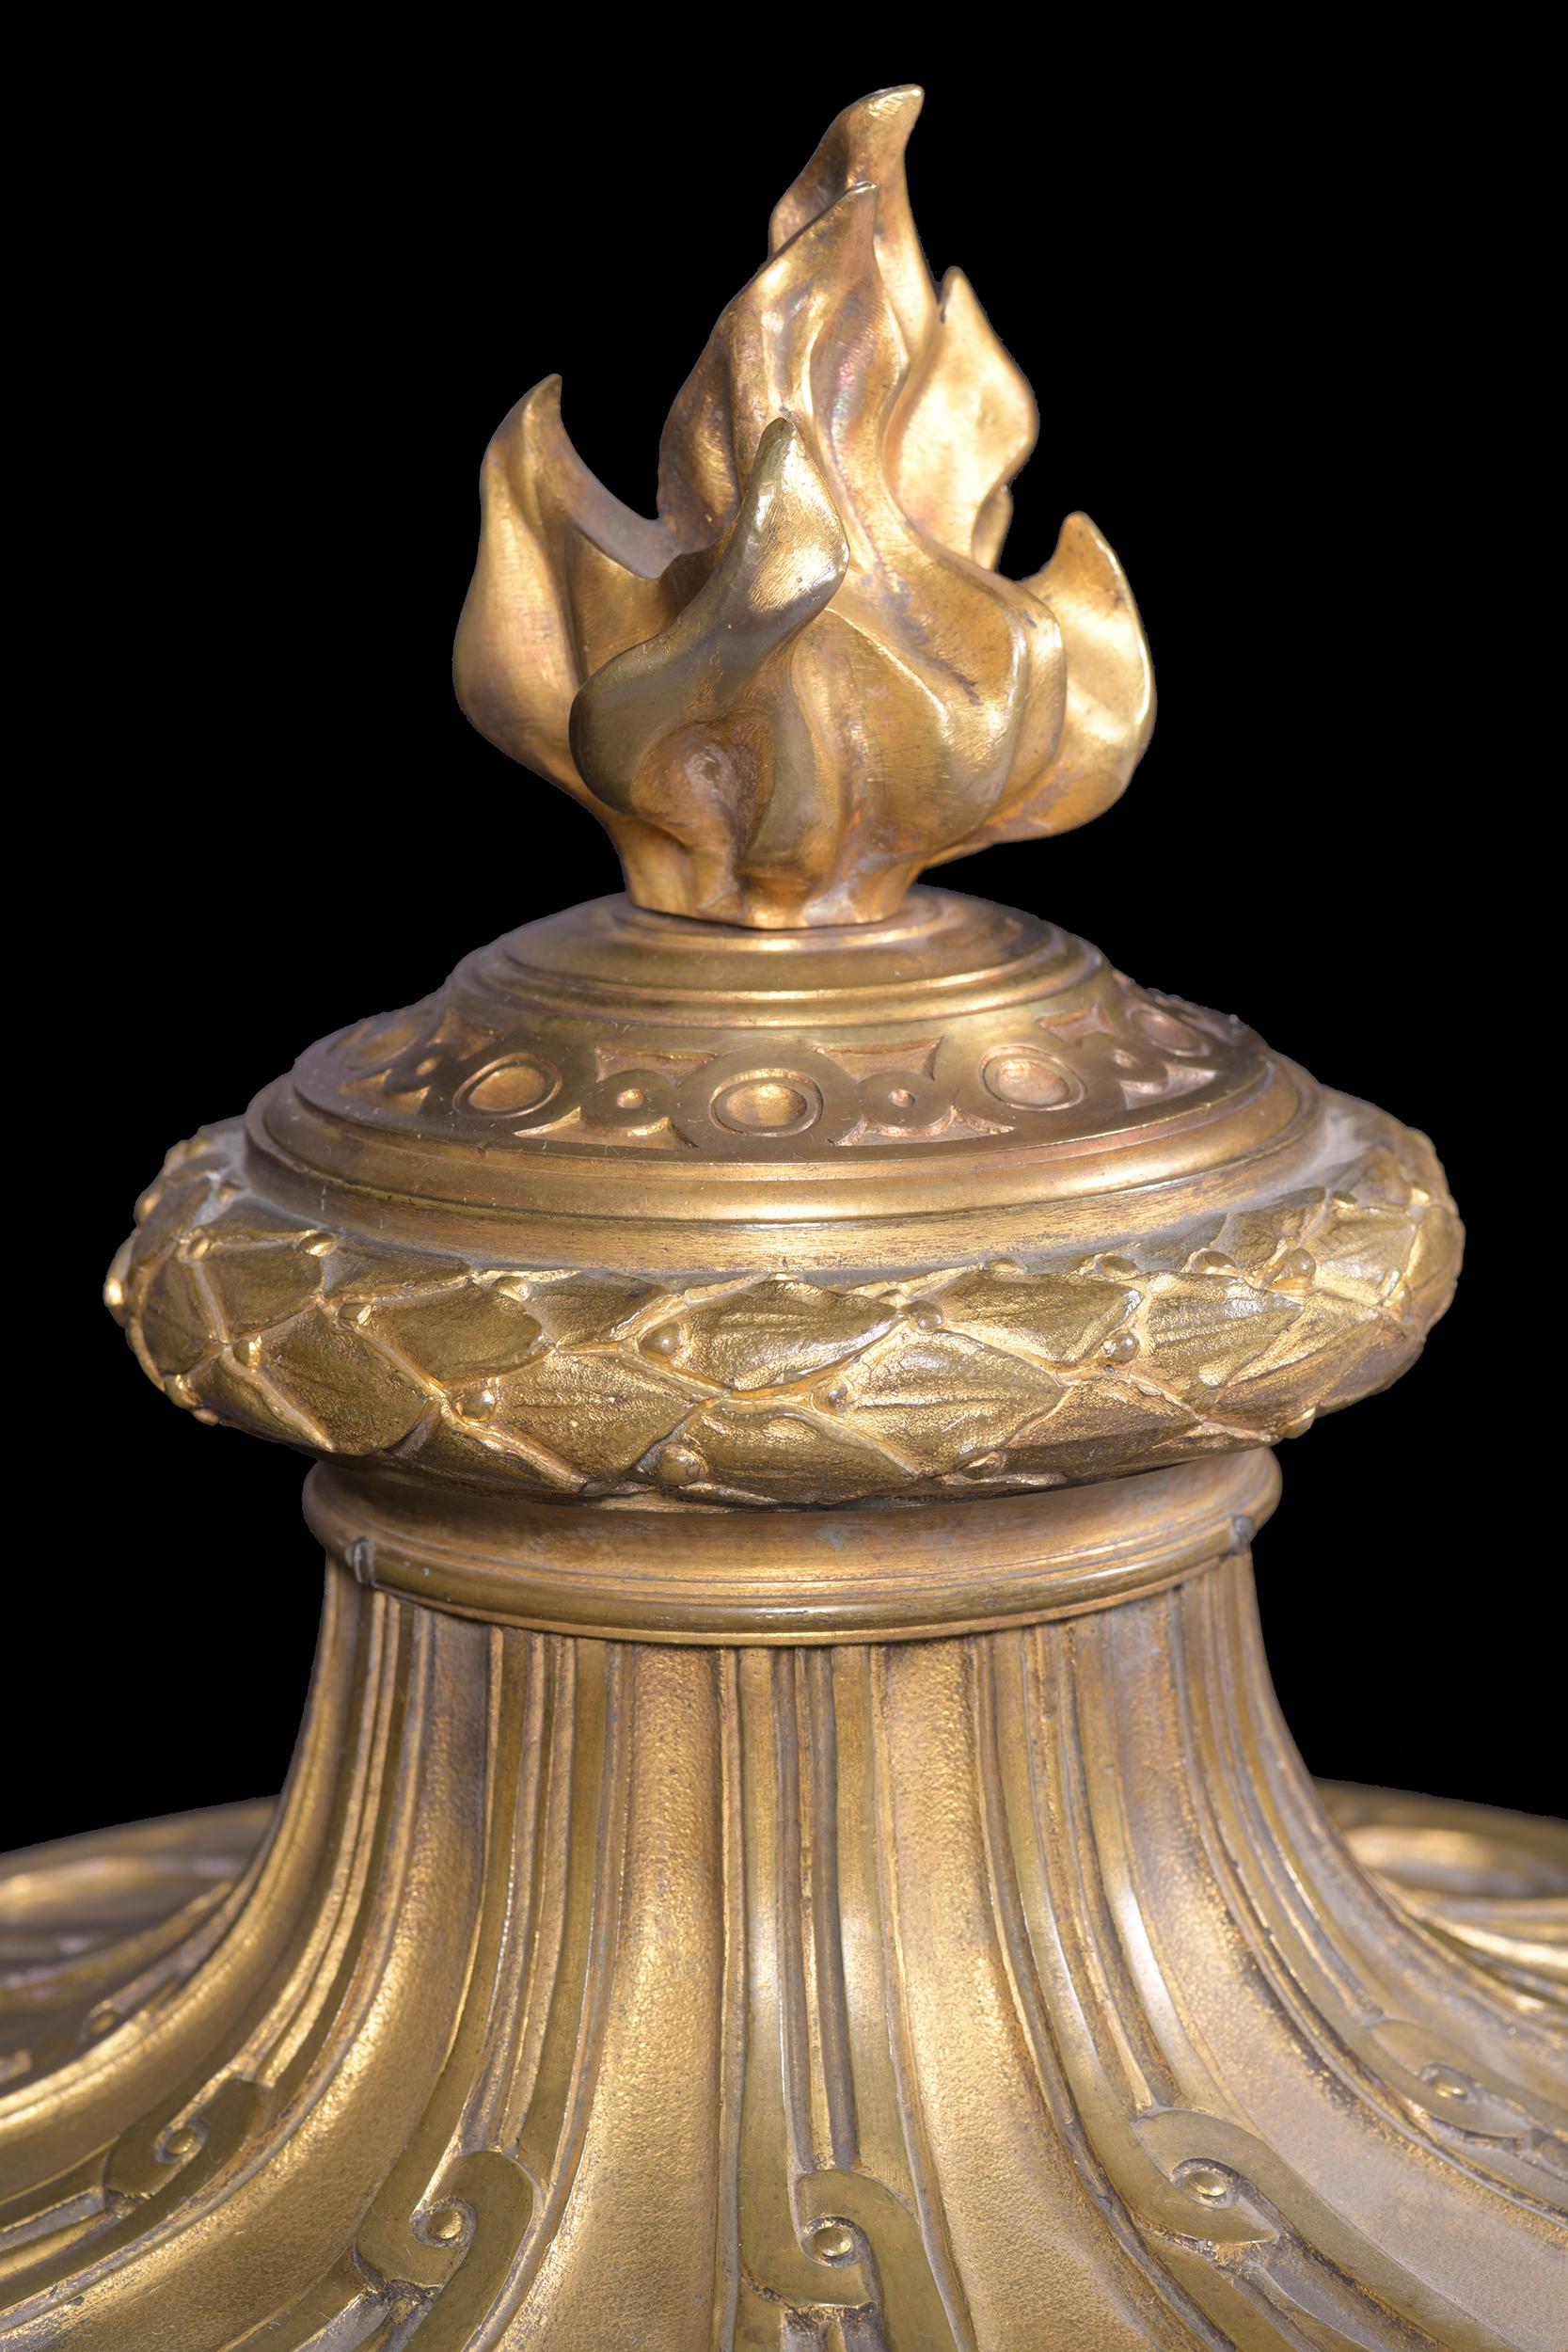 19th Century French Ormolu Centre Piece in the Louis XVI Style For Sale 2